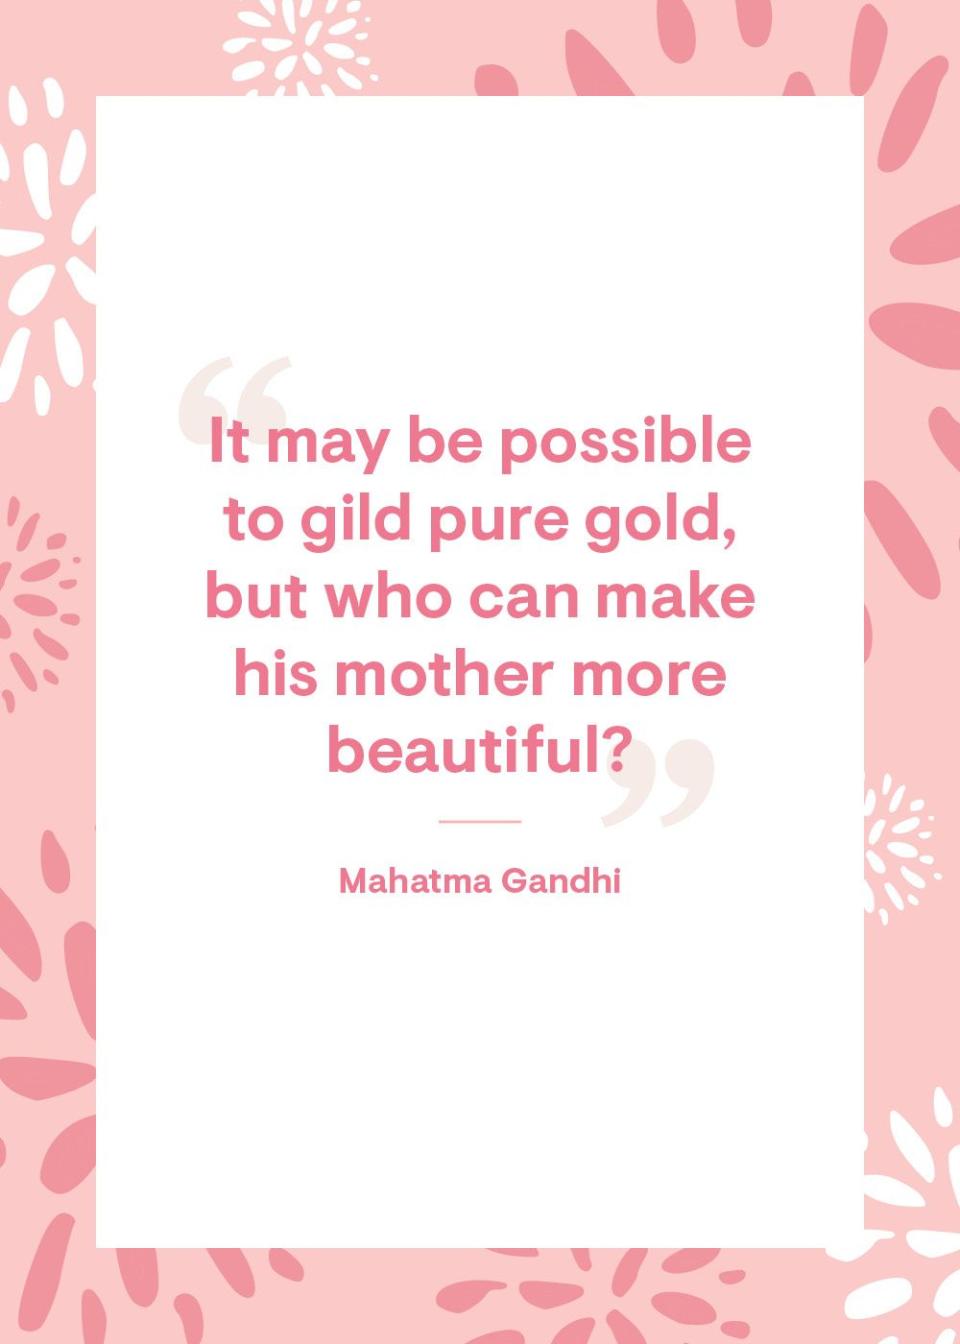 The Best Mother's Day Quotes To Show Her How Much You Care